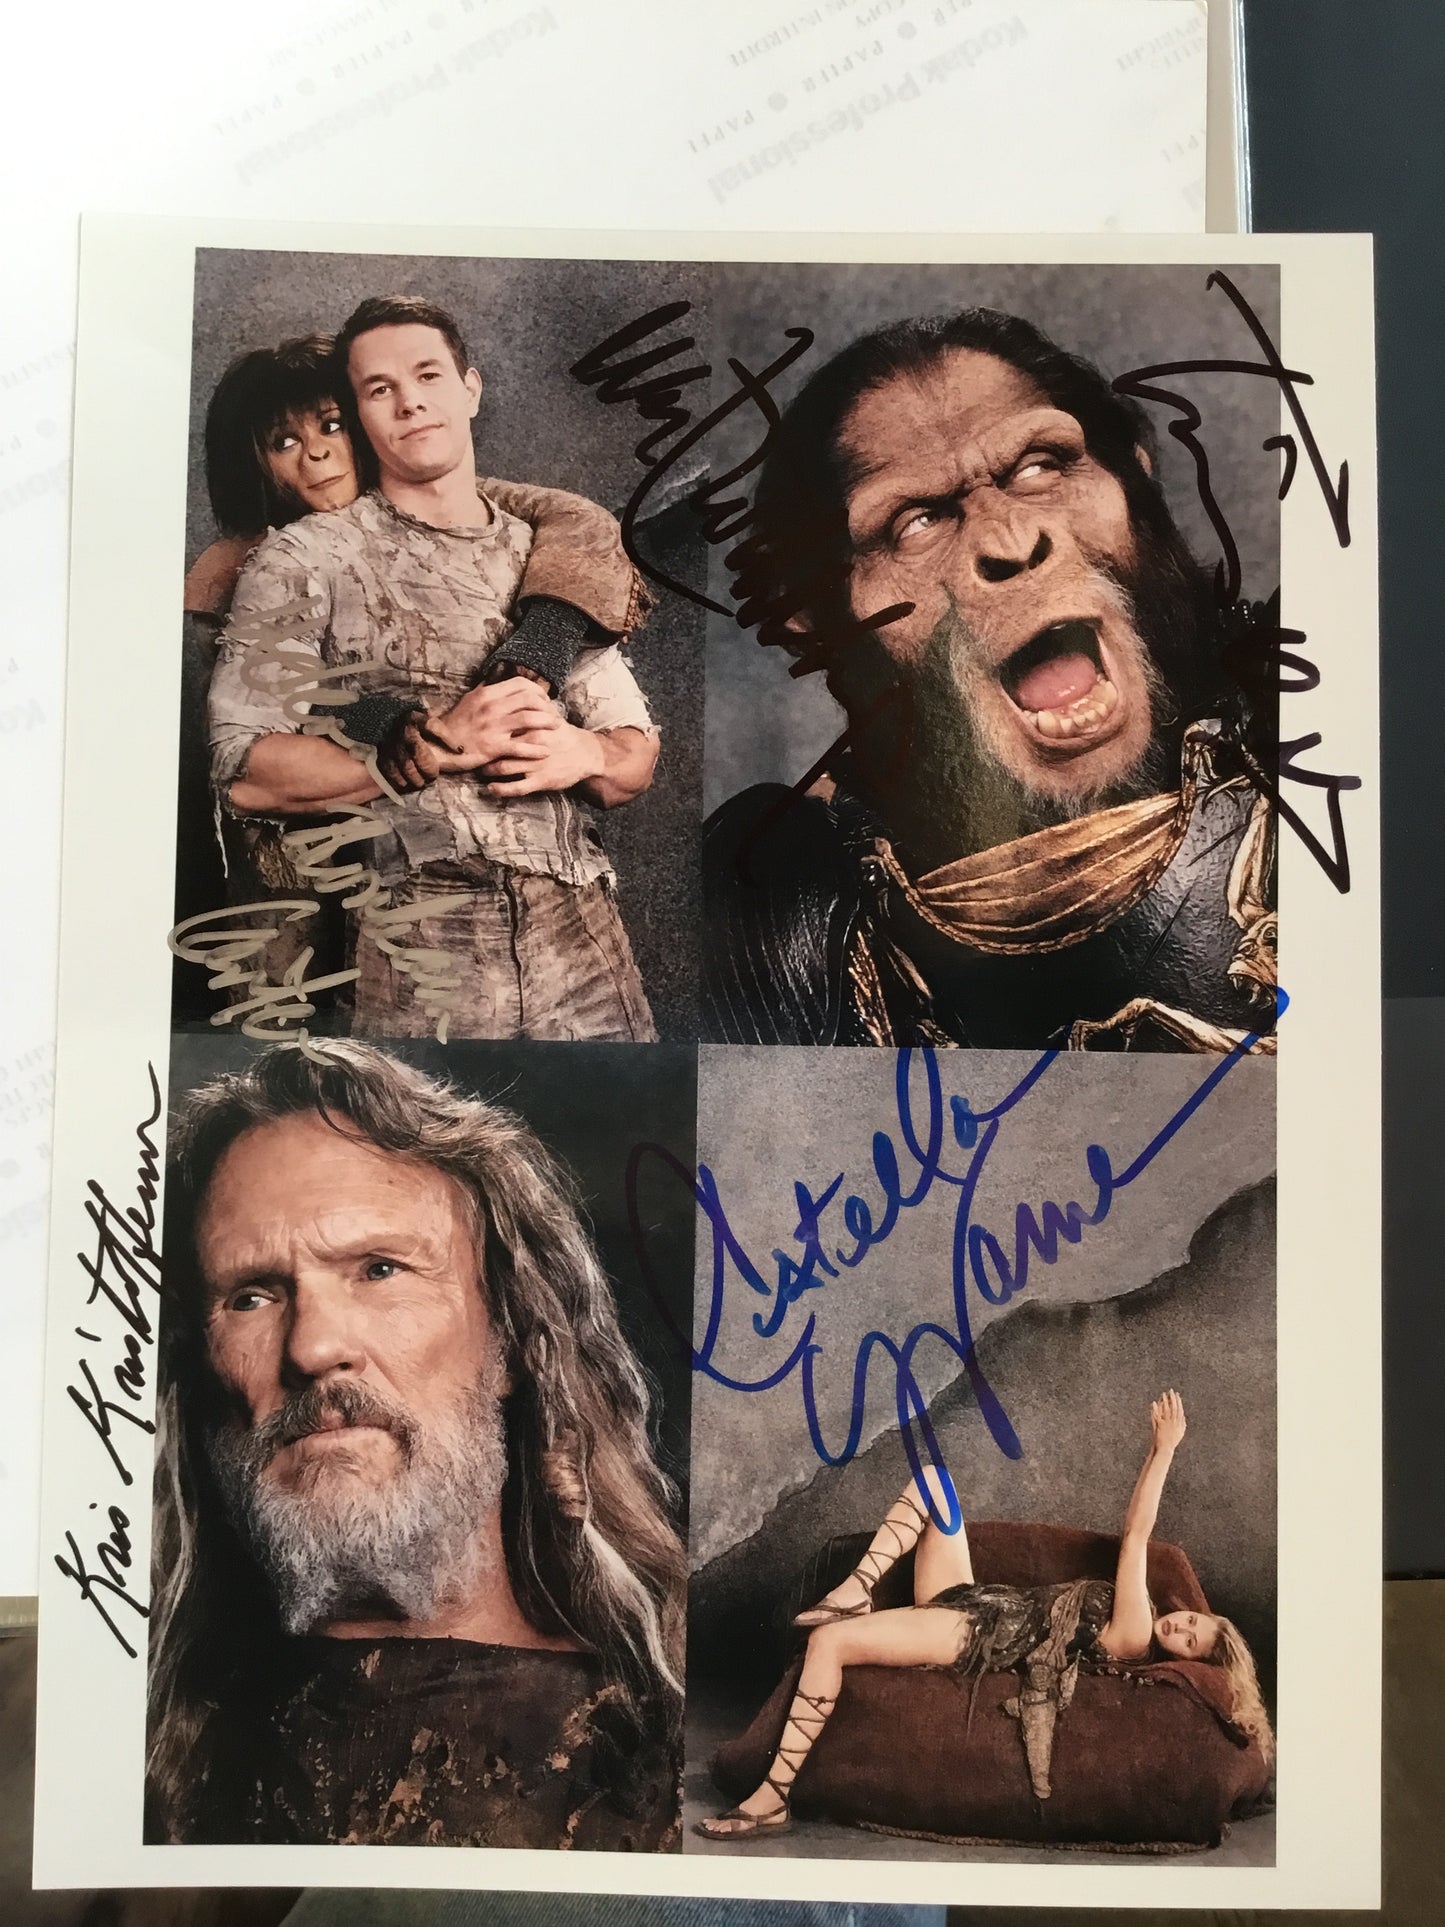 PLANET OF THE APES, Kris Krisstophersen, Tim Roth, Mark Wahlberg, autographs